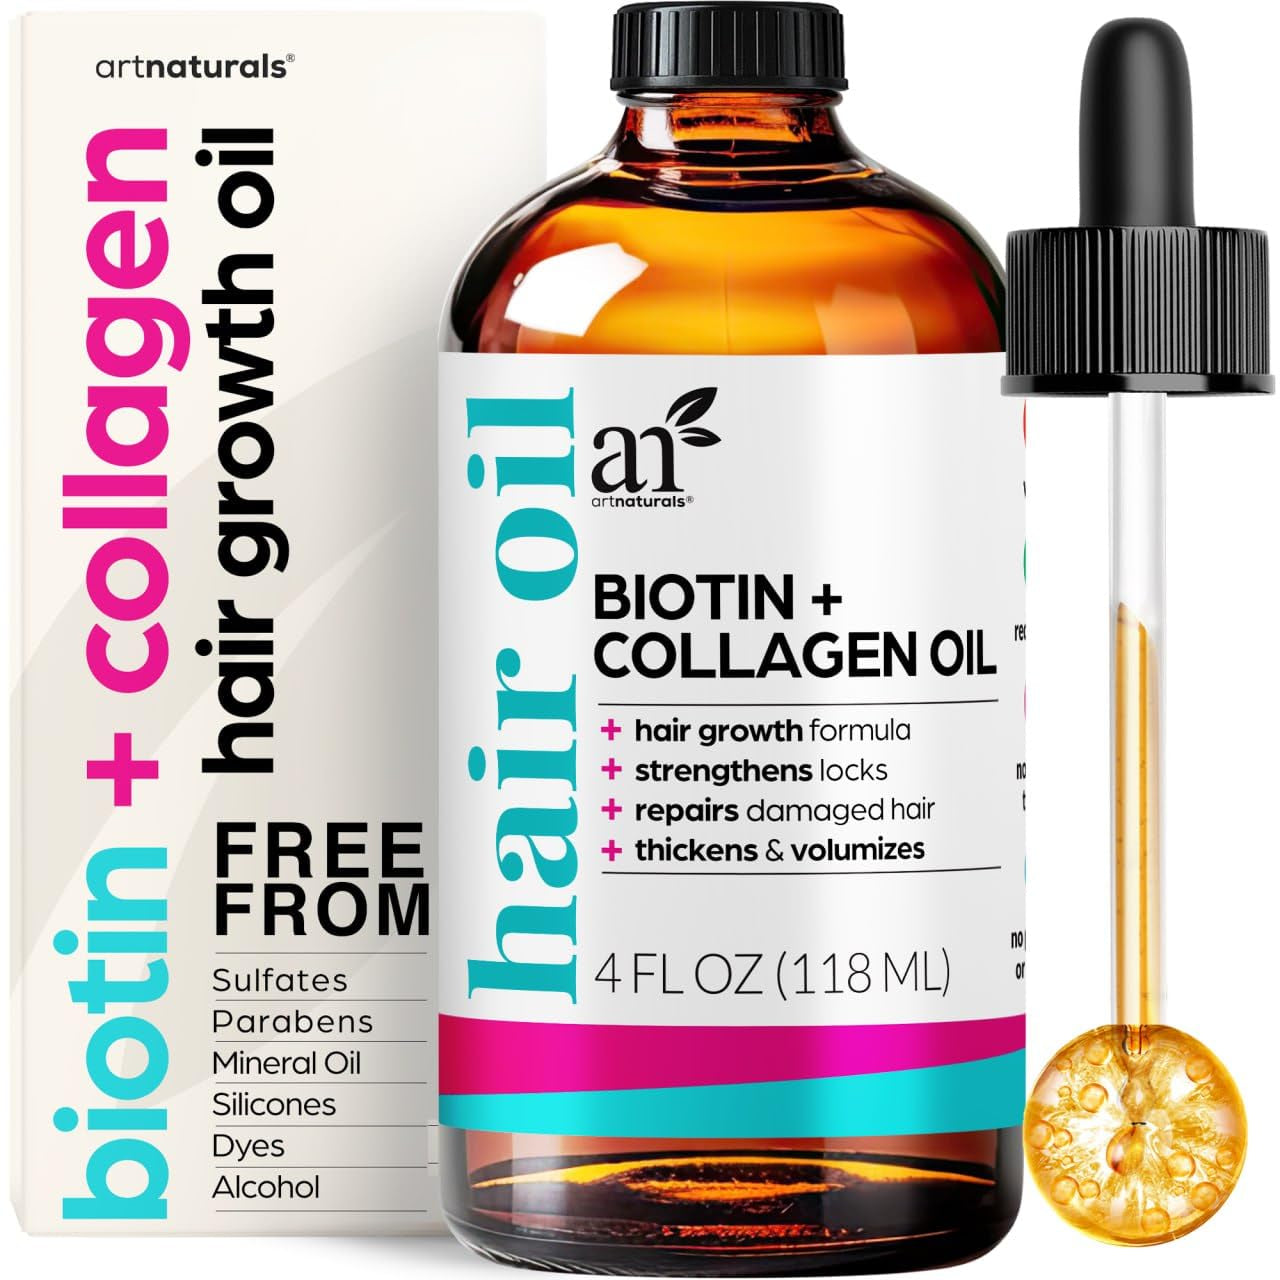 Biotin Collagen Hair Oil 4.0Oz - Growth Promoting Volumizing Formula - Reduce Hair Loss, Strengthens and Nourishes Hair - Controls Frizz & Improves Manageability